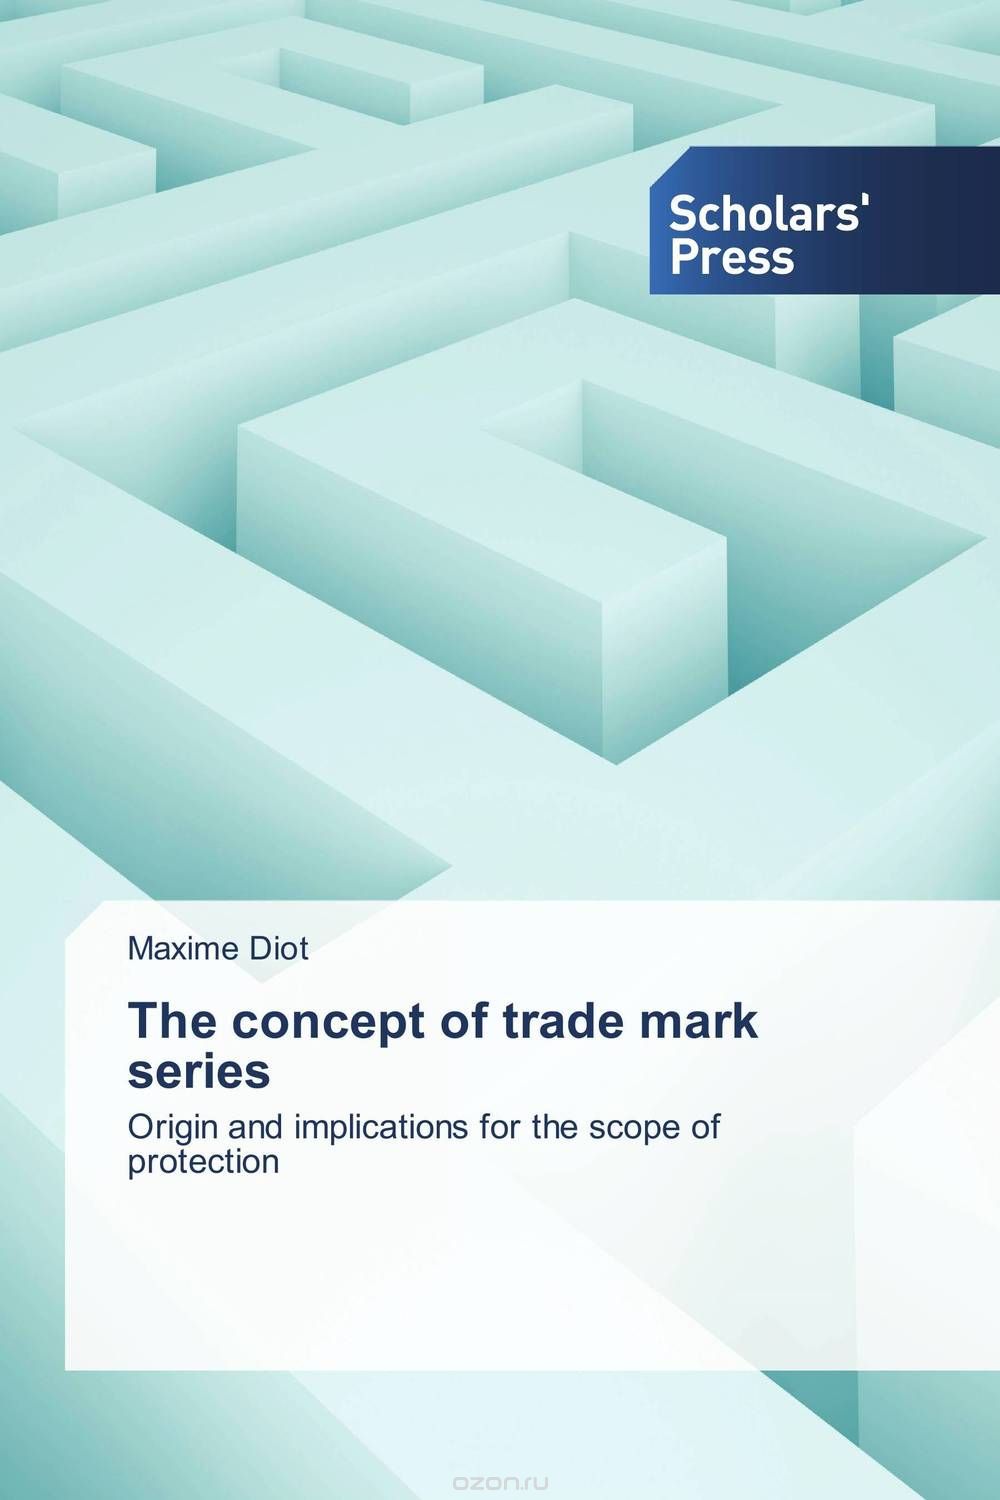 The concept of trade mark series